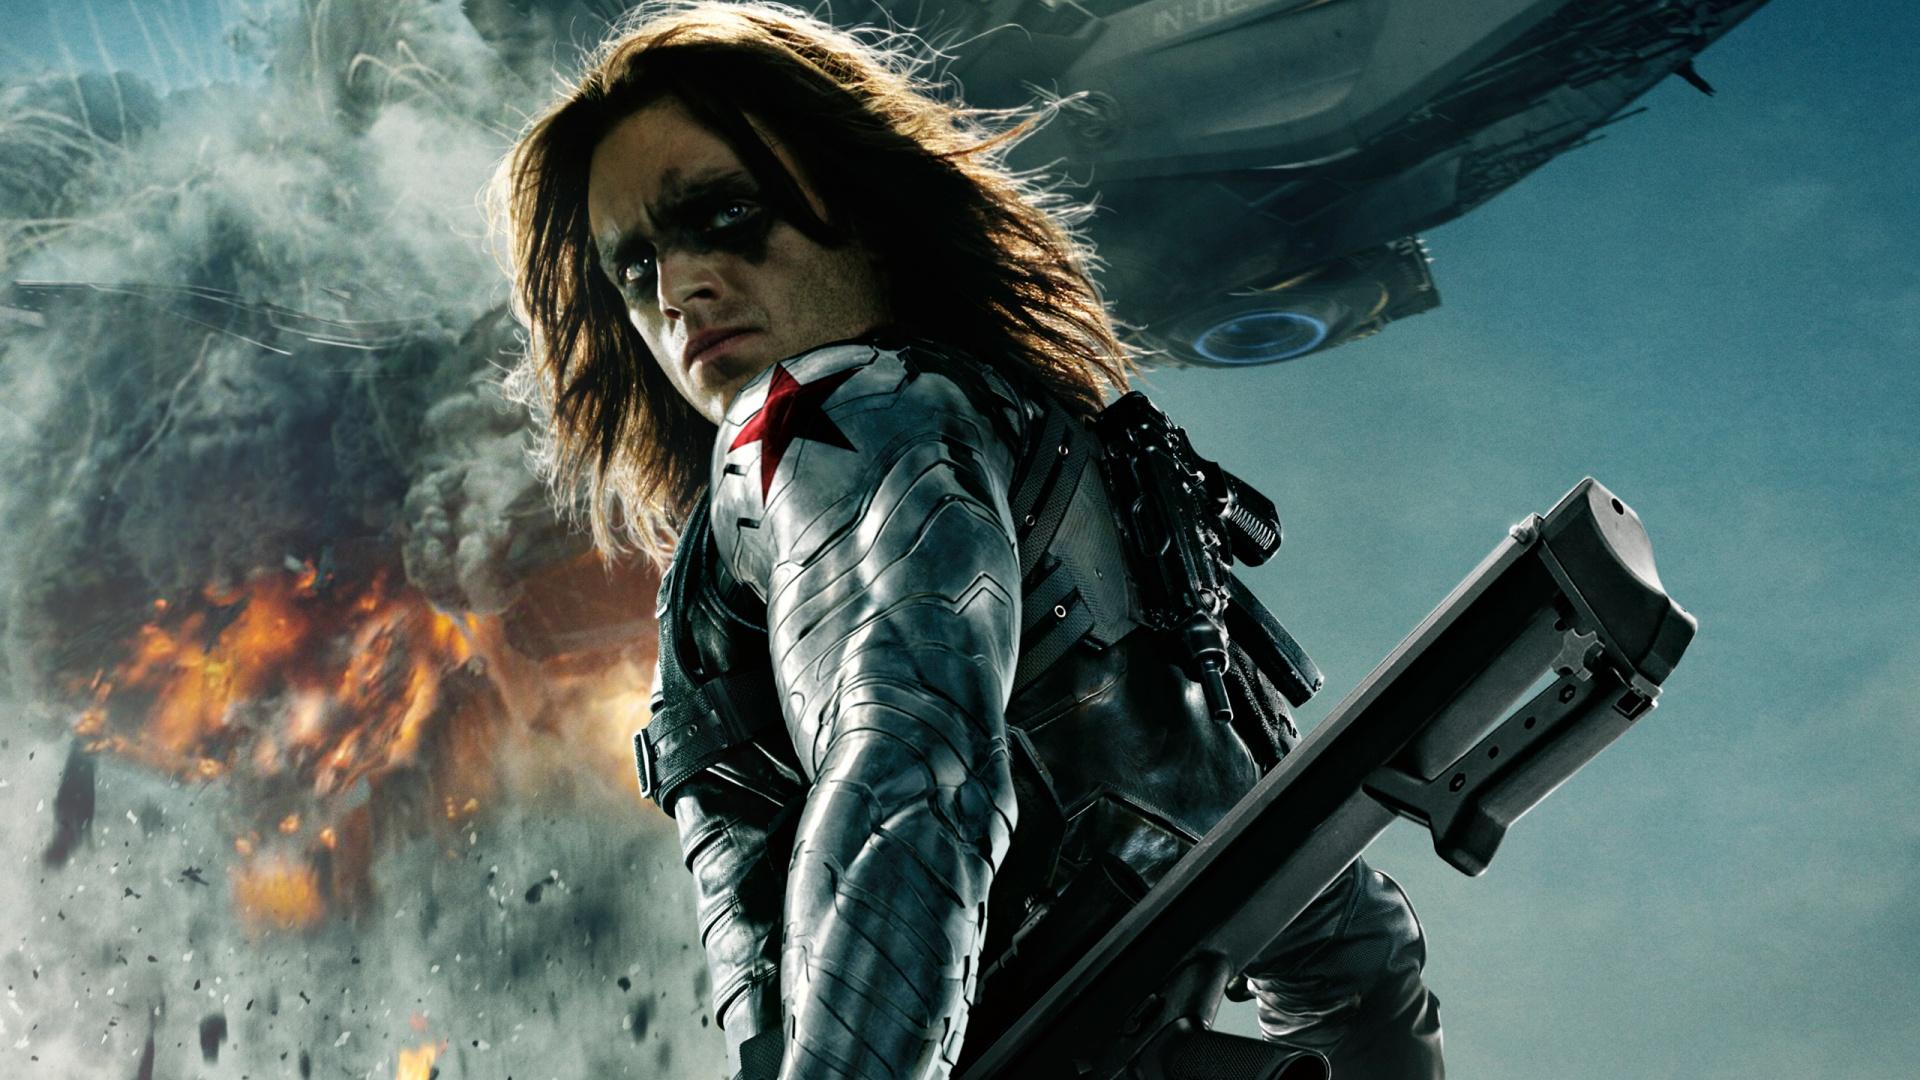 44+] Winter Soldier Wallpapers HD